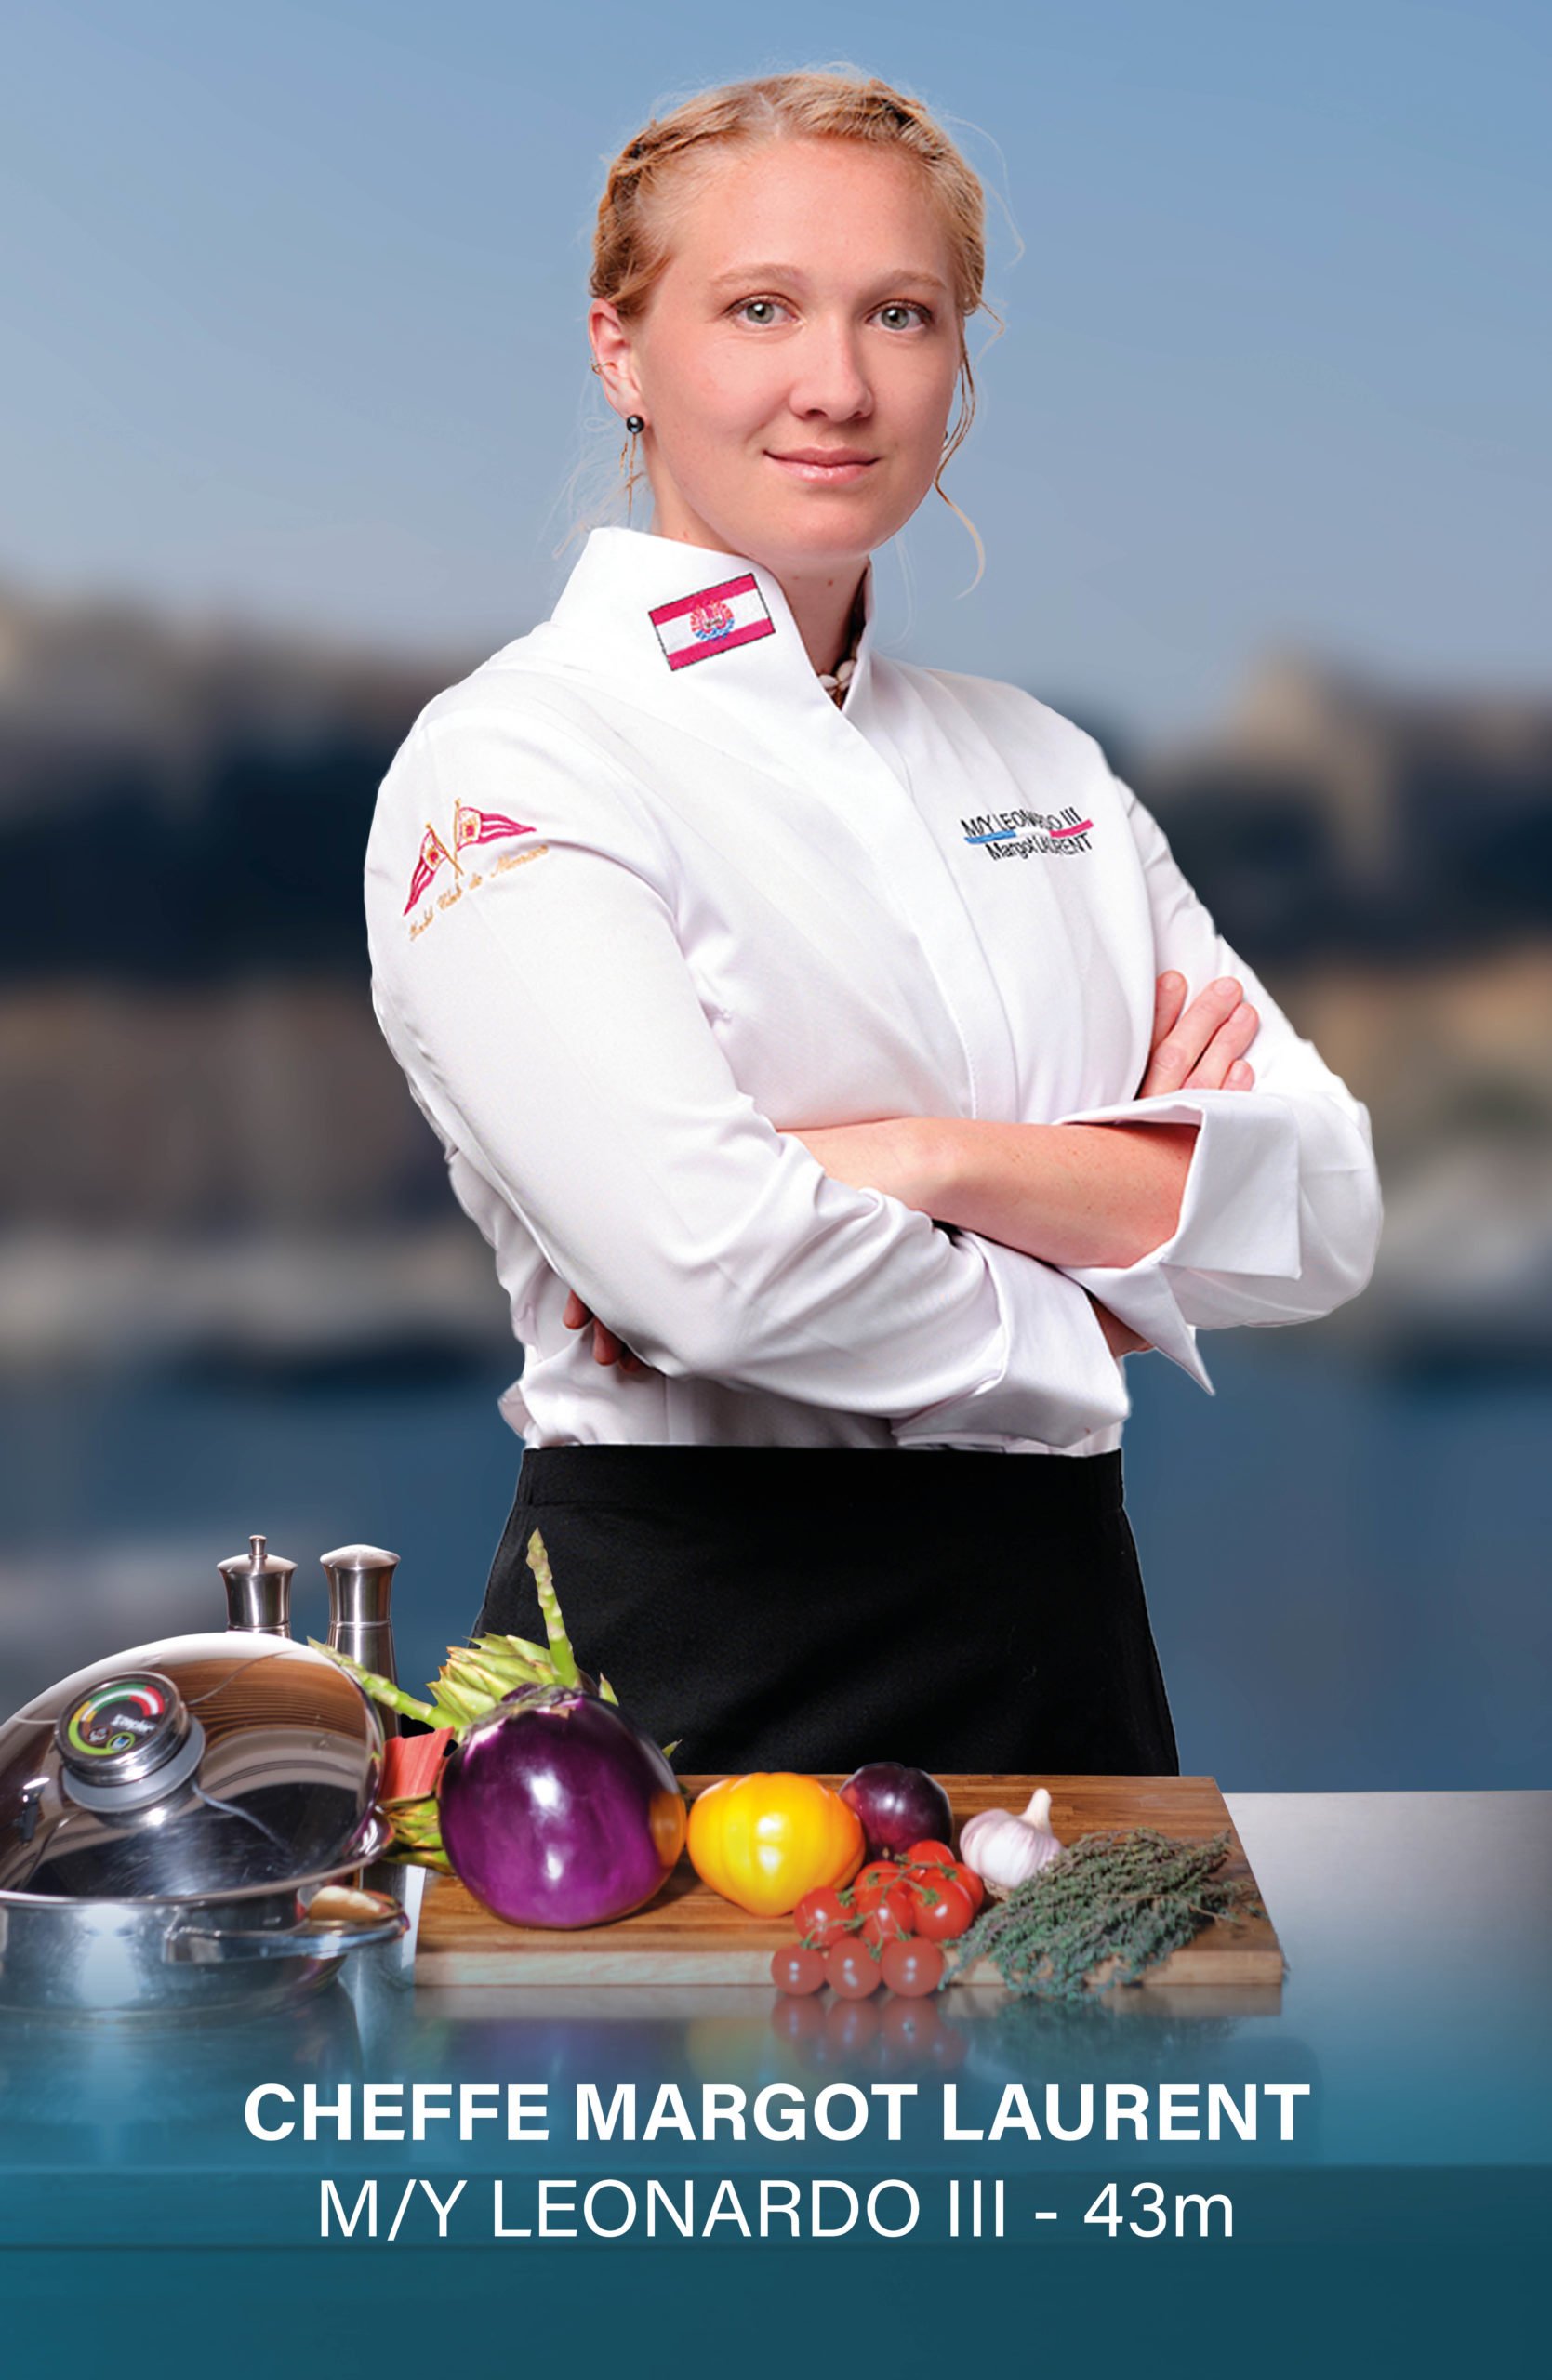 superyacht chef competition